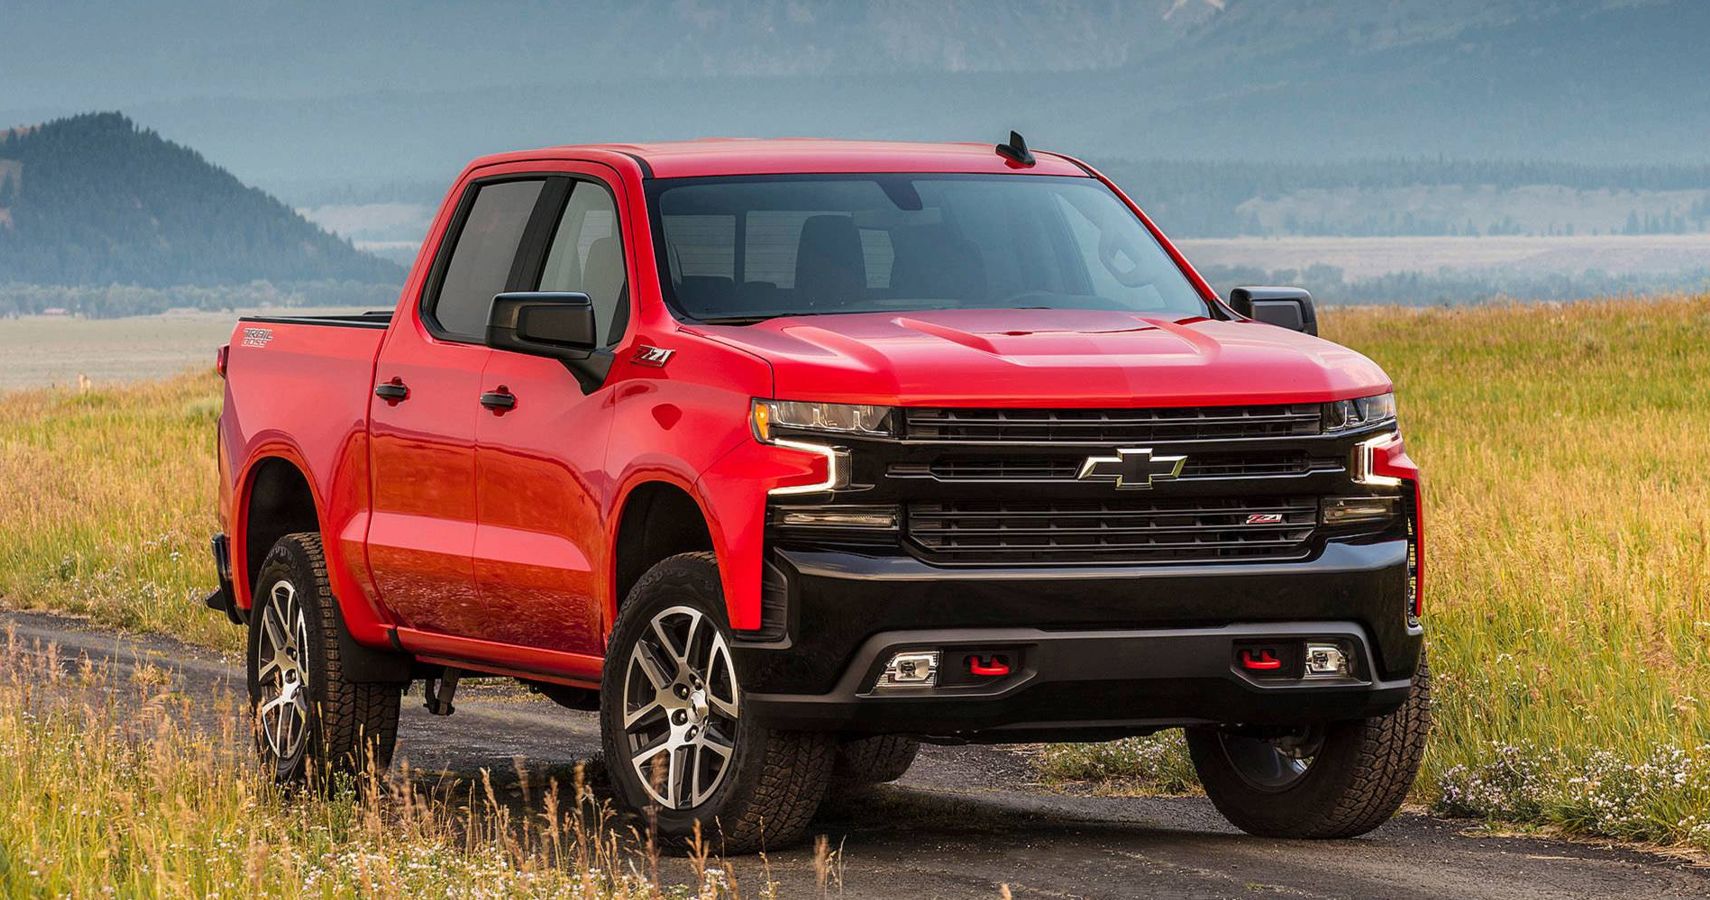 Chevrolet Silverado And Ford F Series Sales Slide In YearToDate